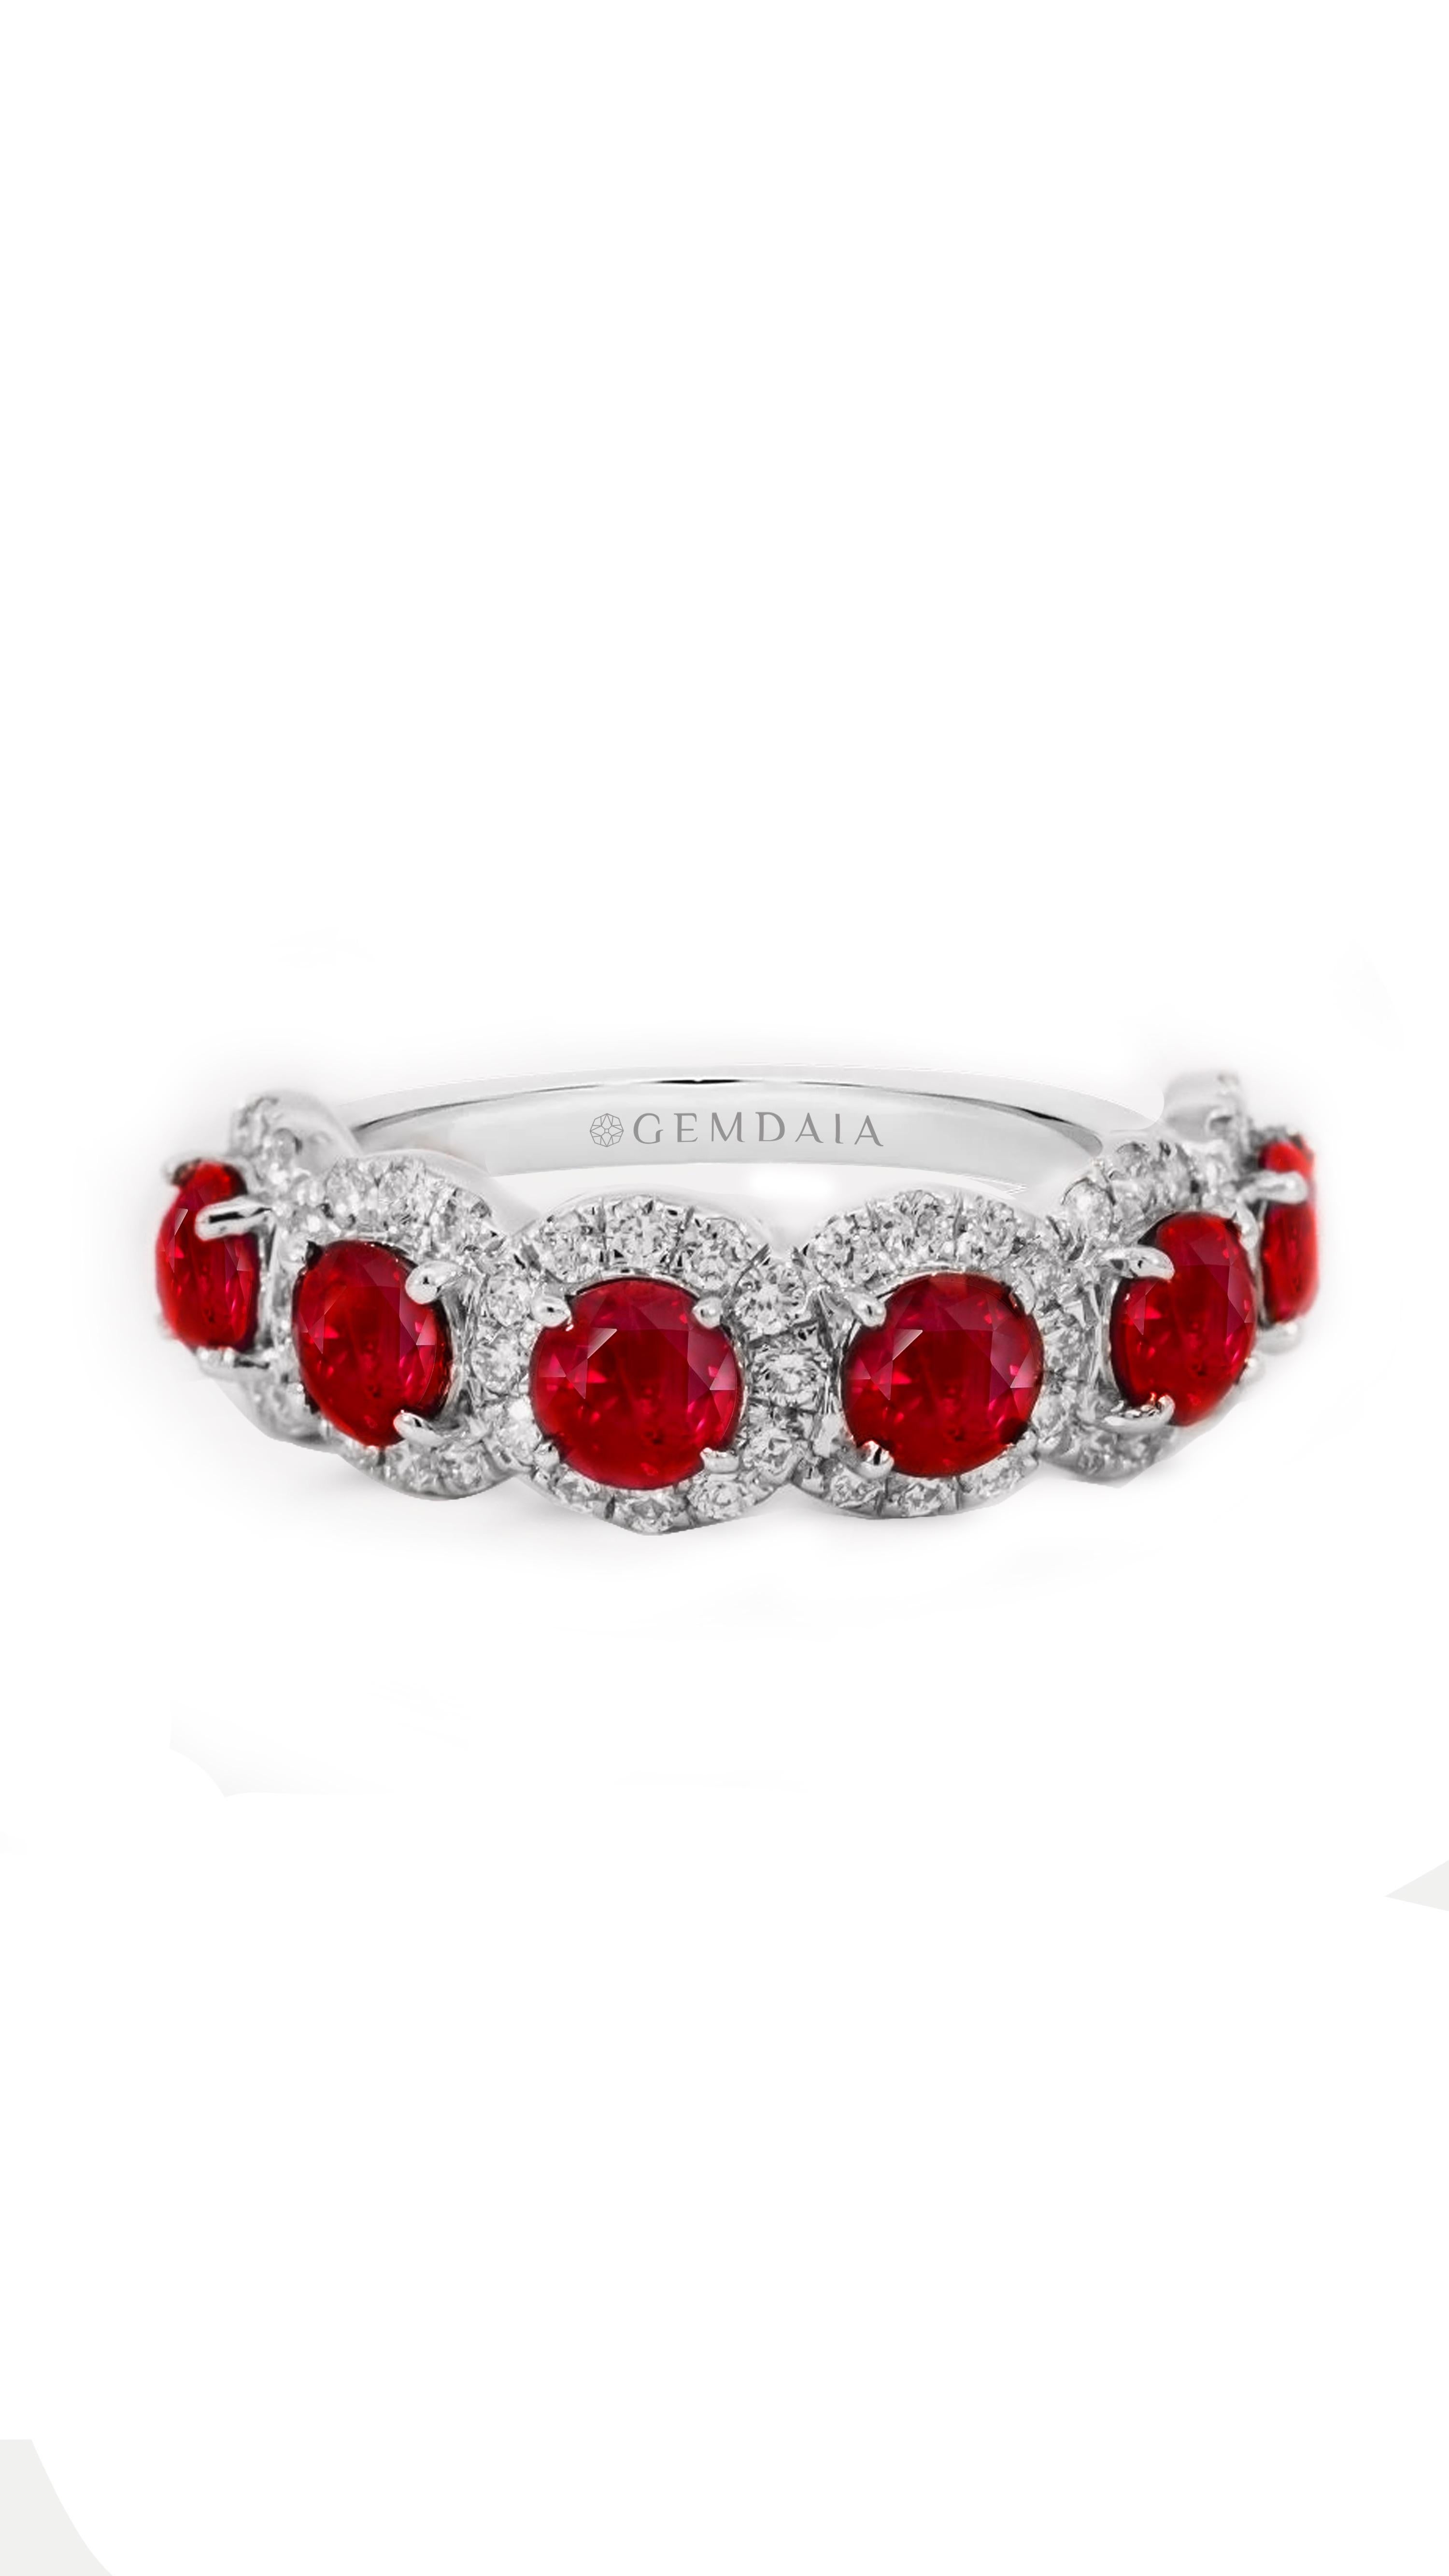 6 fiery, natural, vivid red rubies embraced by shimmering diamonds, meticulously crafted in solid gold. Crafted for elegance and sophistication, it embodies the essence of fiery passion and romance. Perfect for July celebrations, birthdays, or as a